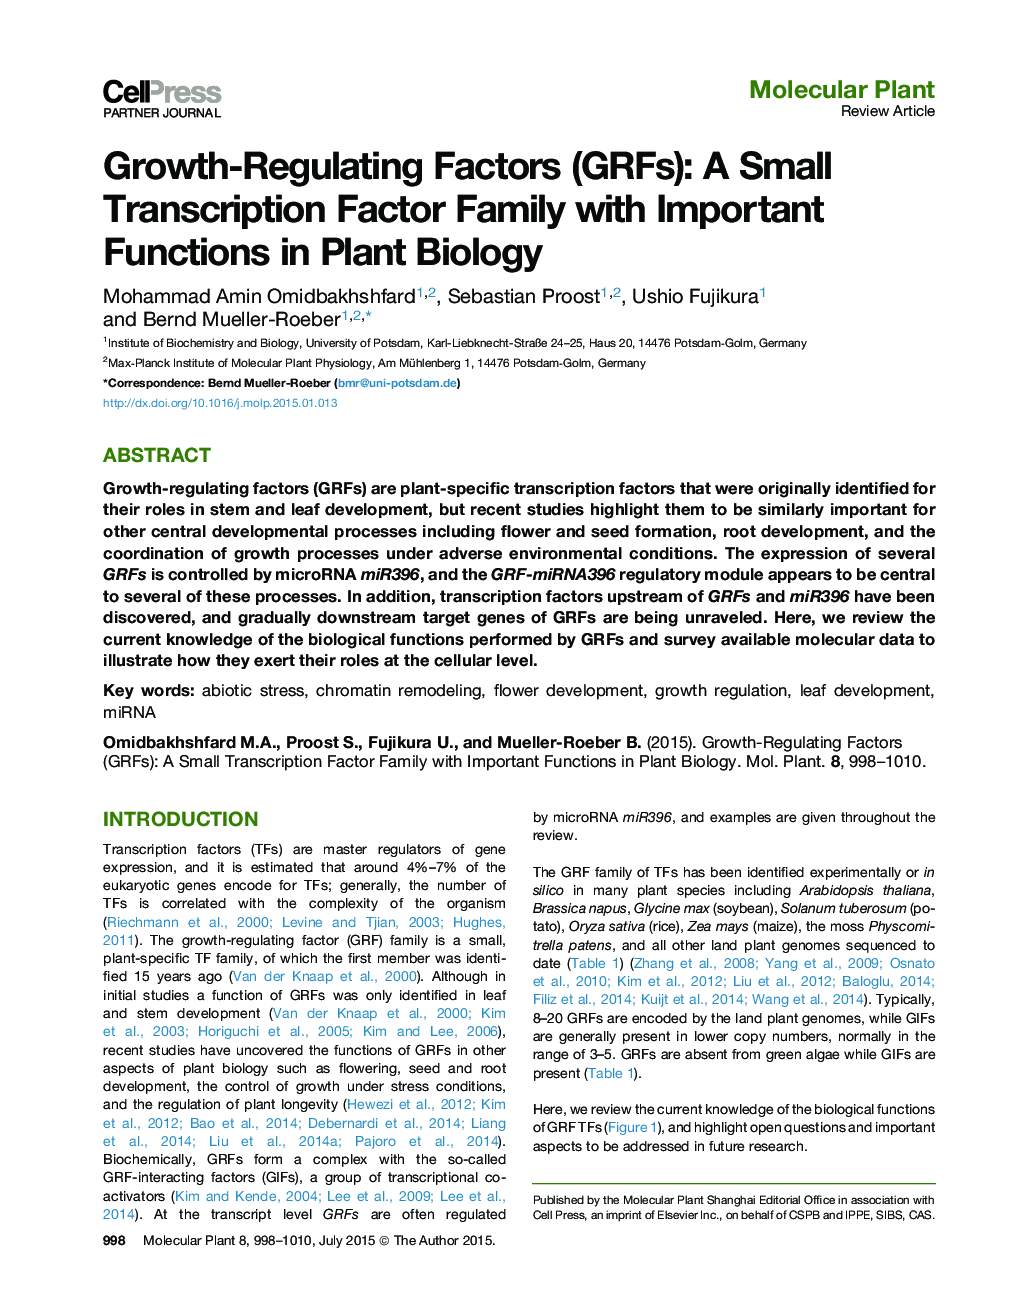 Growth-Regulating Factors (GRFs): A Small Transcription Factor Family with Important Functions in Plant Biology 